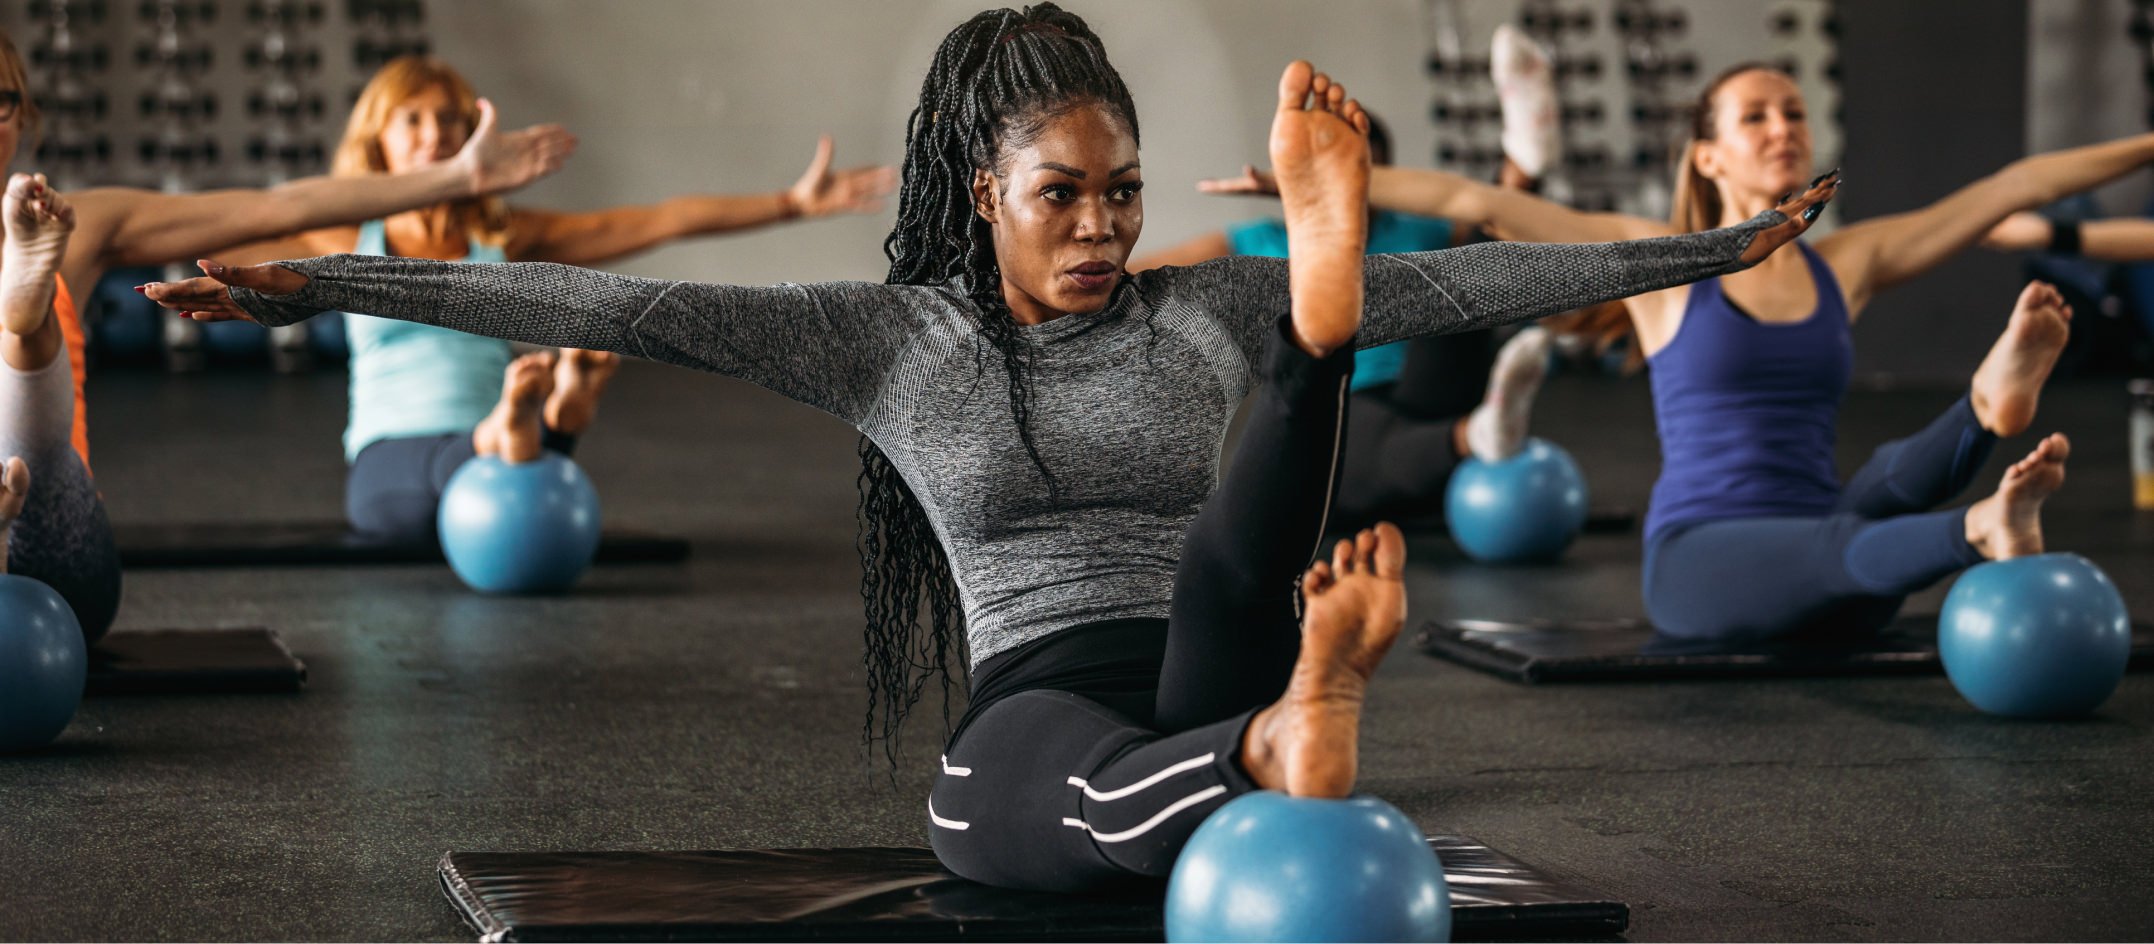 Fitness Classes: 6 Hot New Options You Should Try